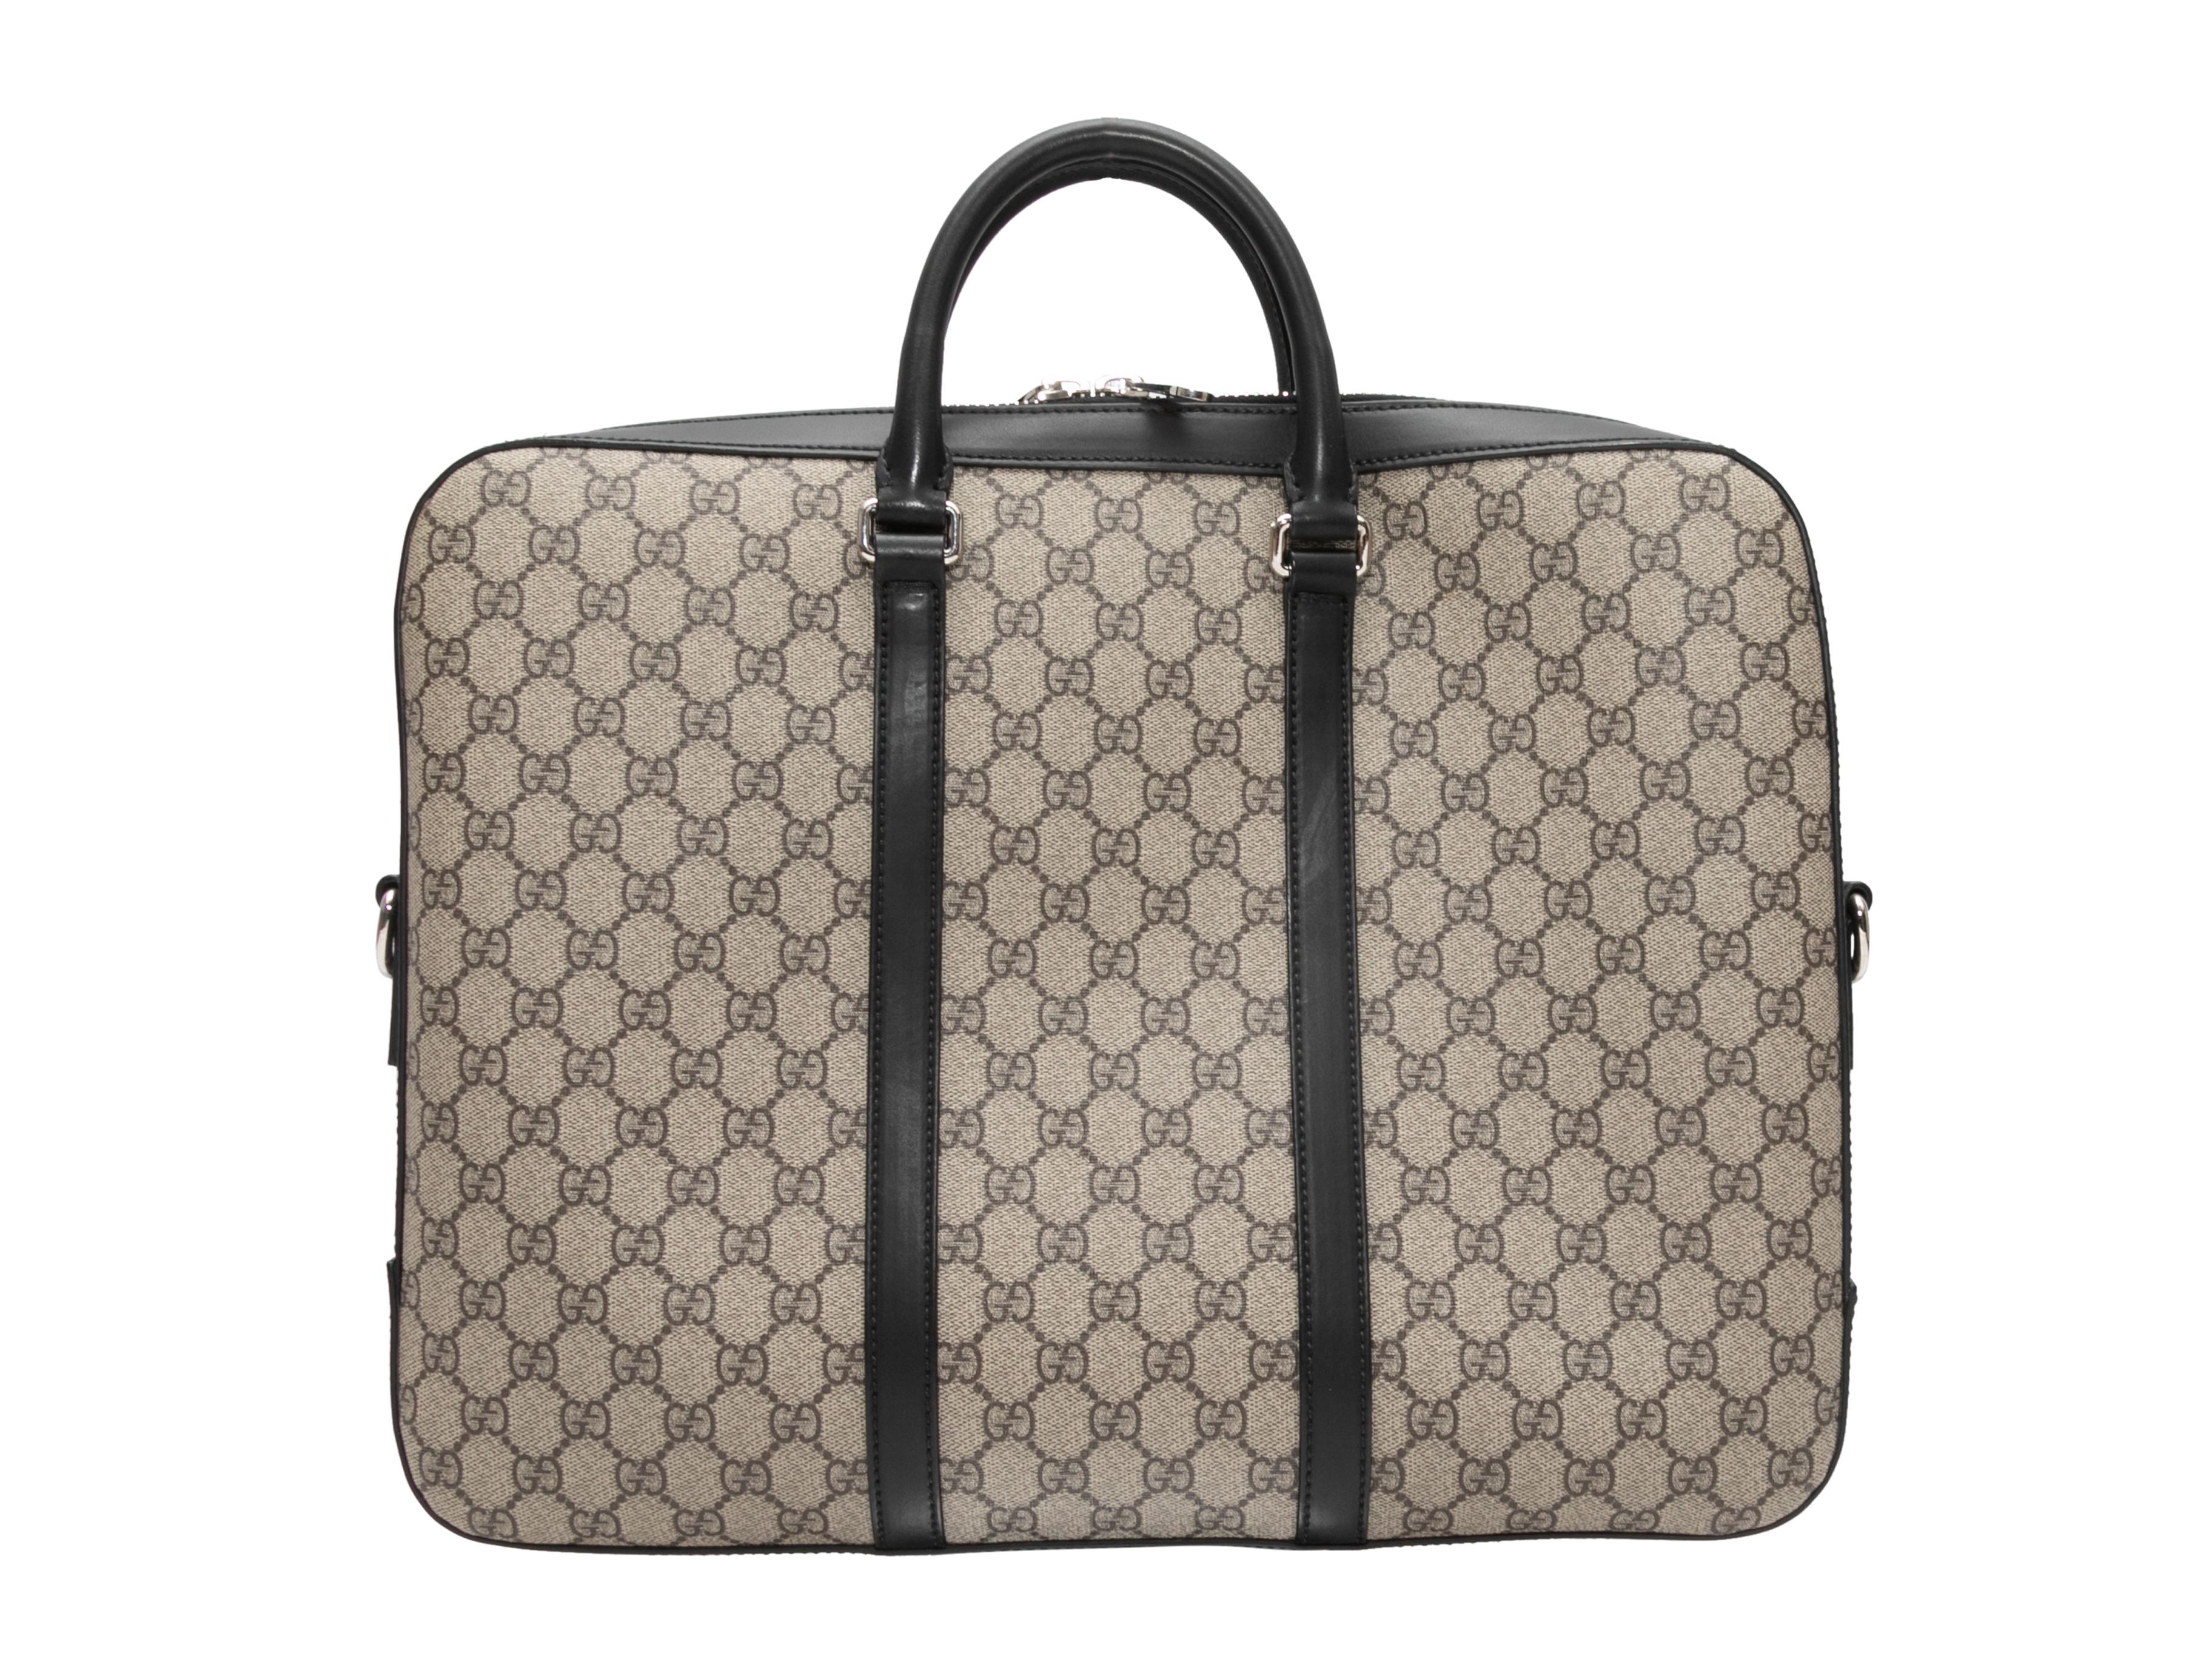 Beige & Black Gucci Monogram Crossbody Briefcase. This briefcase features a coated canvas body, leather trim, silver-tone hardware, dual top handles, a single flat shoulder strap, and a top zip closure. 16.5